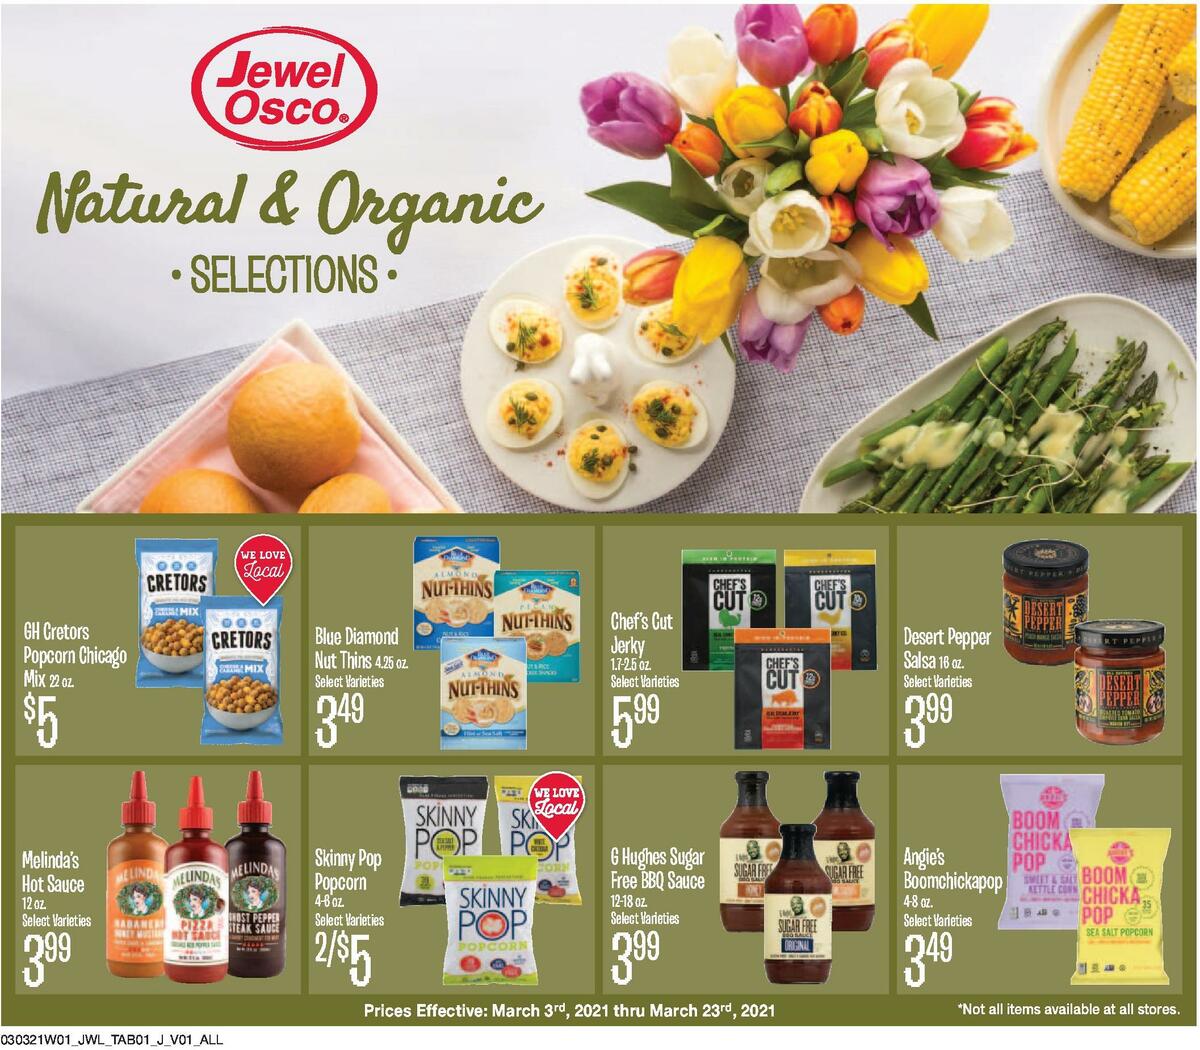 Jewel Osco Natural & Organic Weekly Ad from March 3